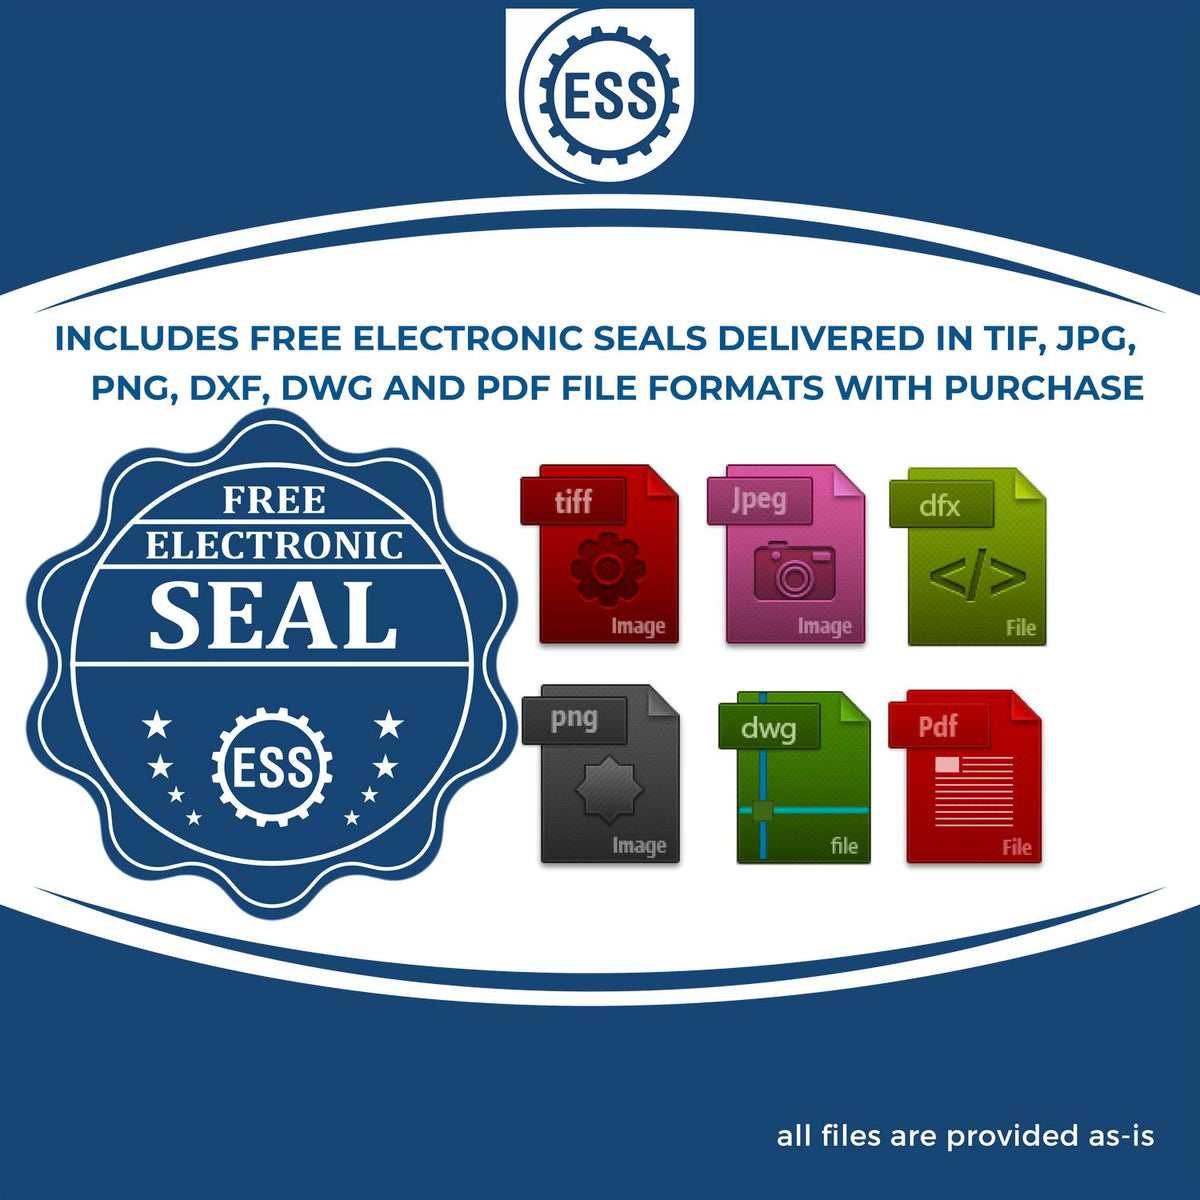 An infographic for the free electronic seal for the State of South Dakota Extended Long Reach Geologist Seal illustrating the different file type icons such as DXF, DWG, TIF, JPG and PNG.